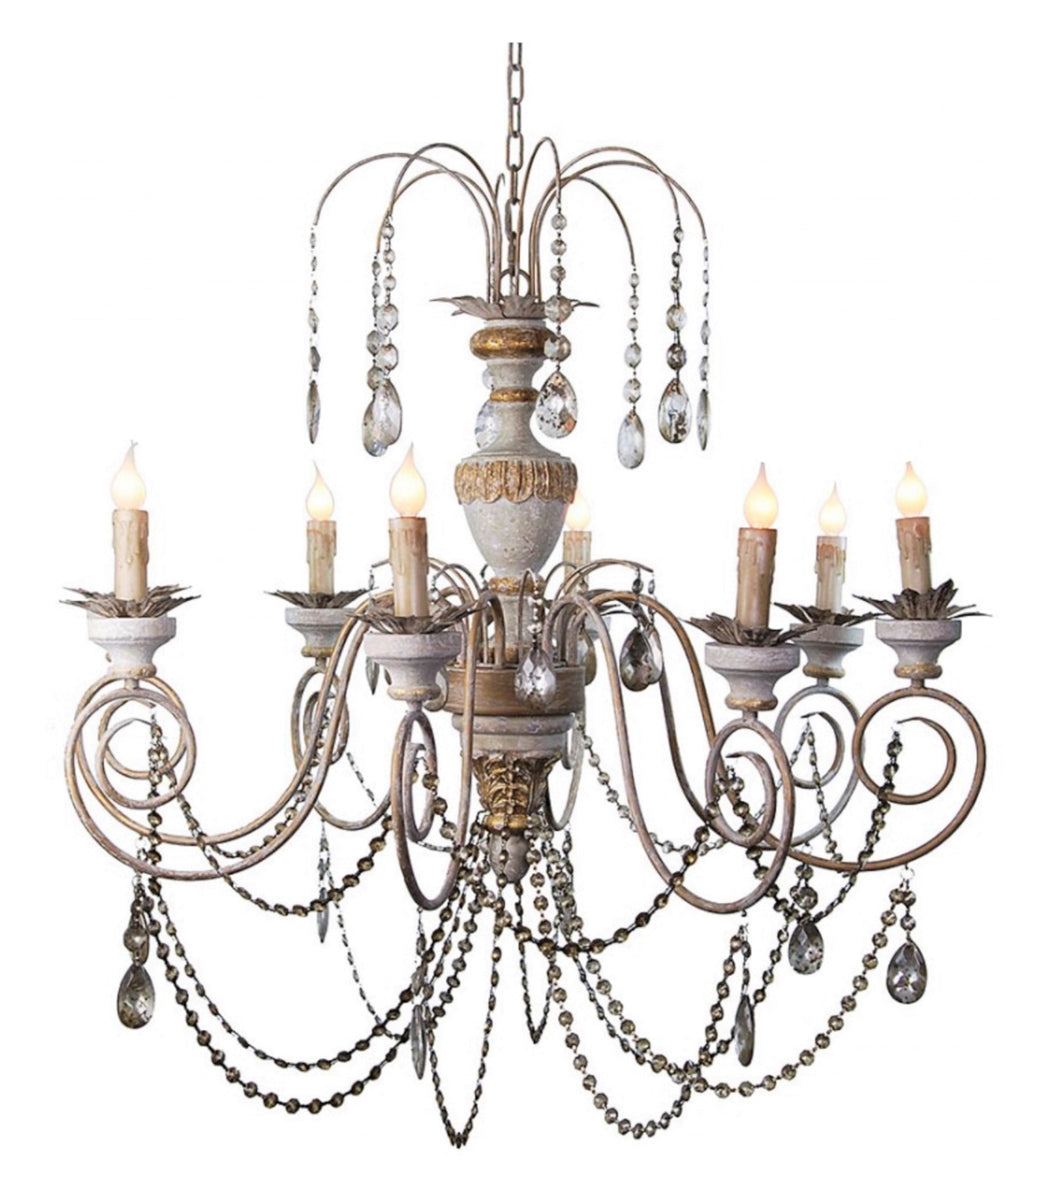 Hand Carved Wood Chandelier with Antiqued Crystal Drops